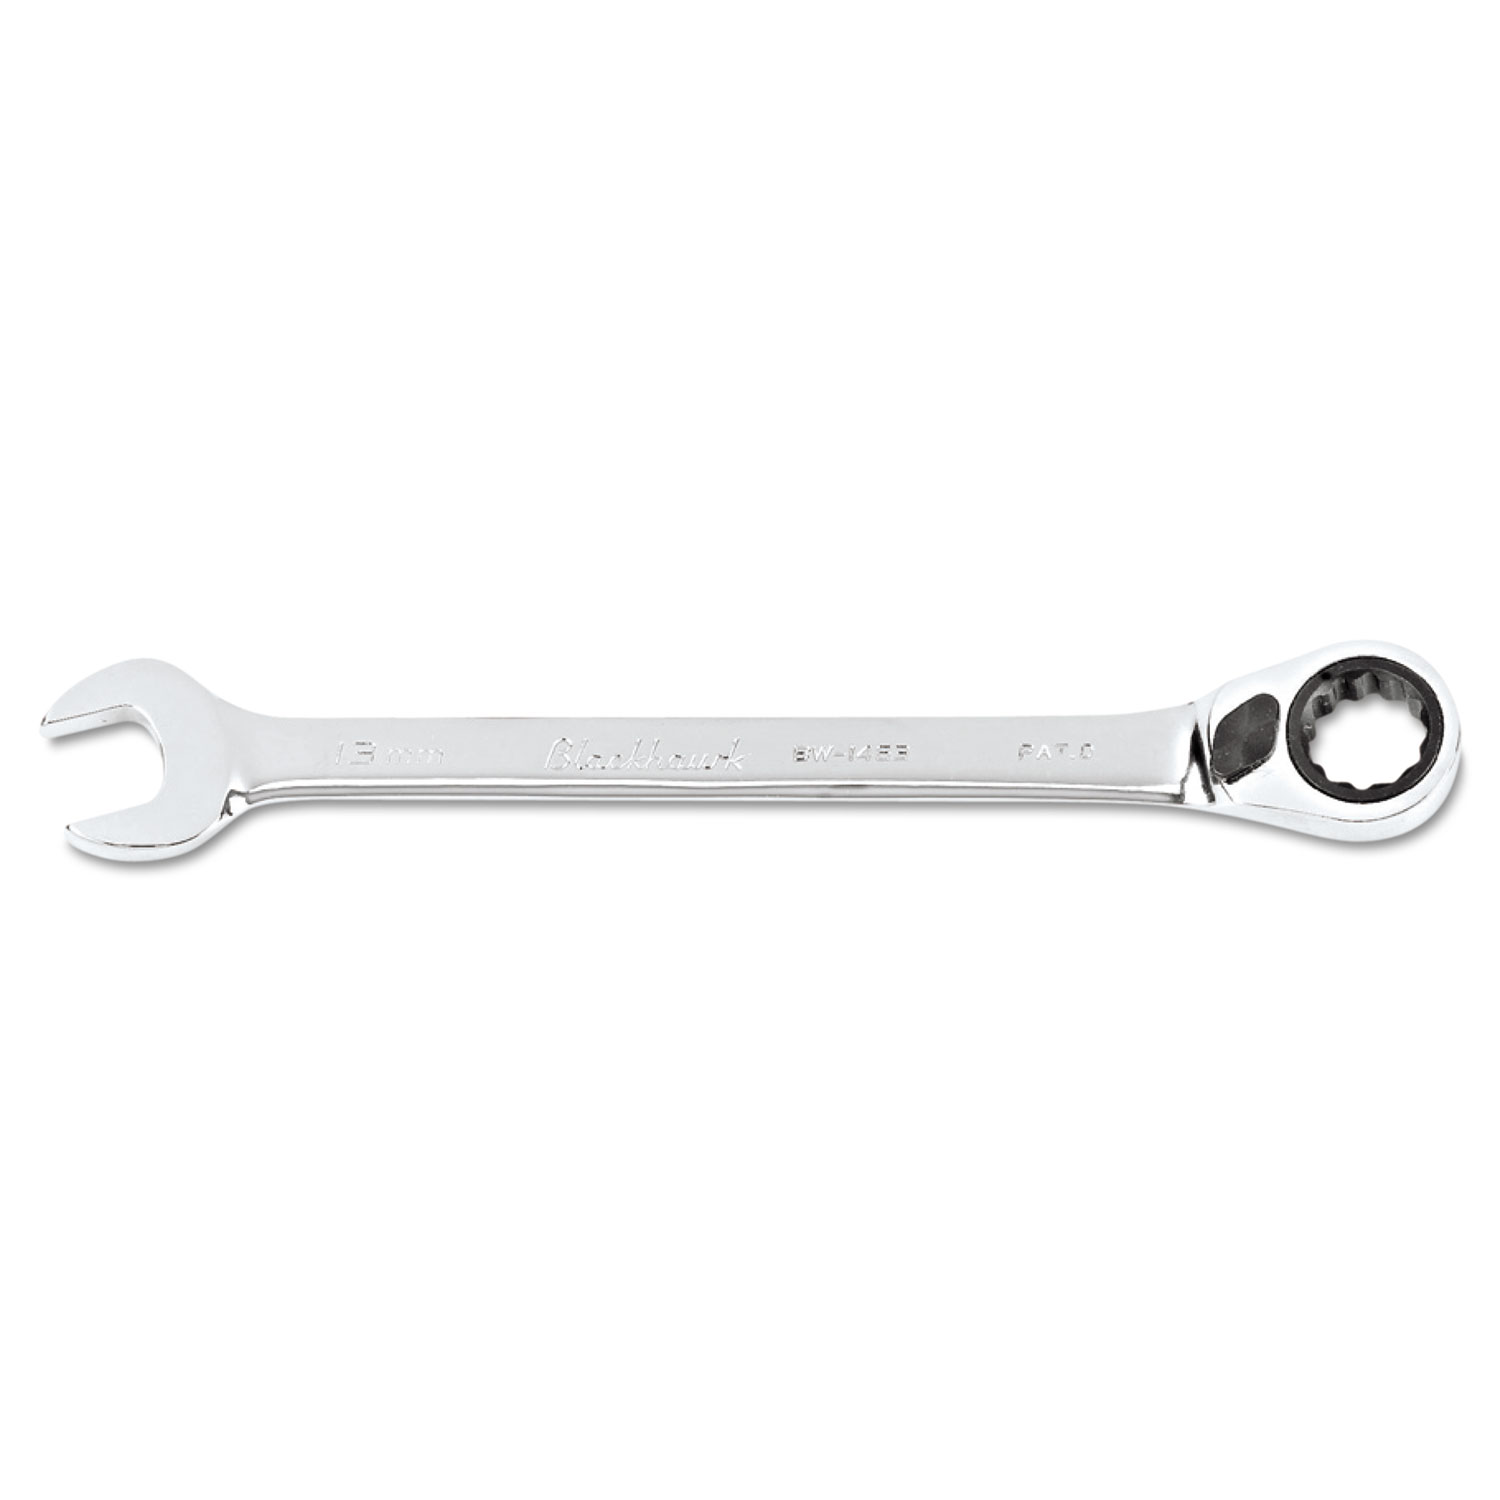 Reversible Ratcheting Box Wrench, 1-1/8 Long